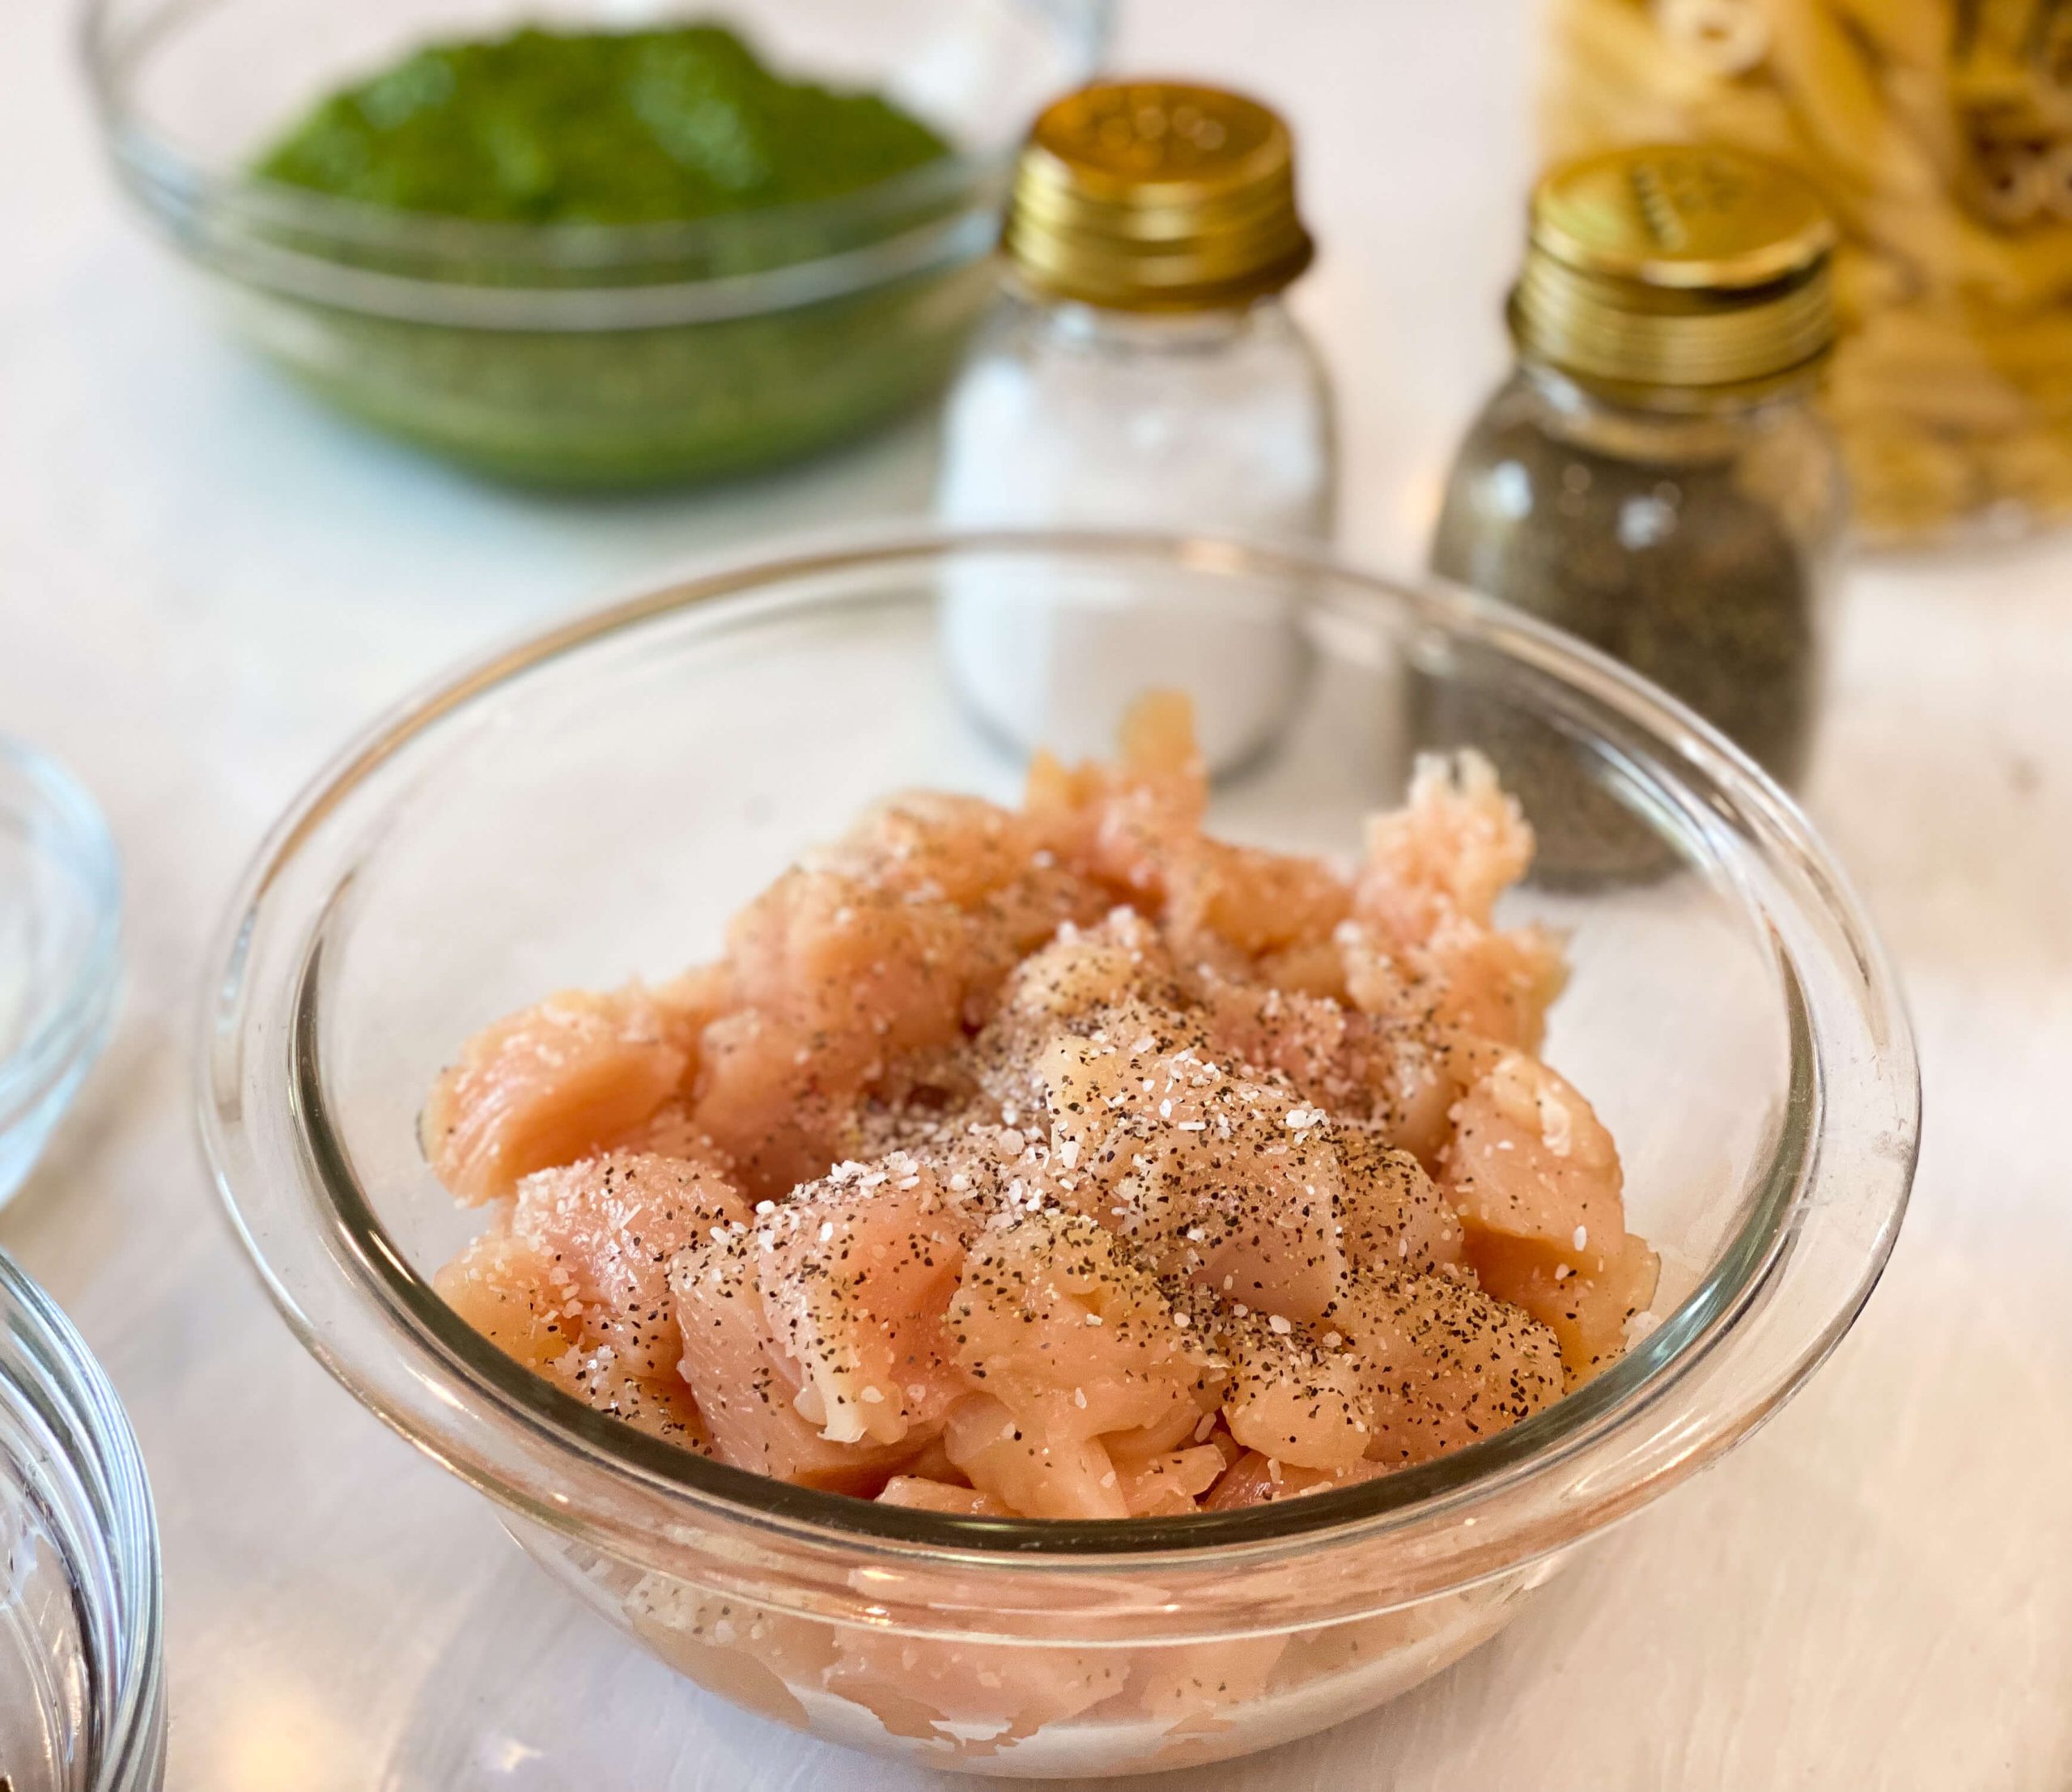 raw chicken bites seasoned with salt and pepper before getting cooked